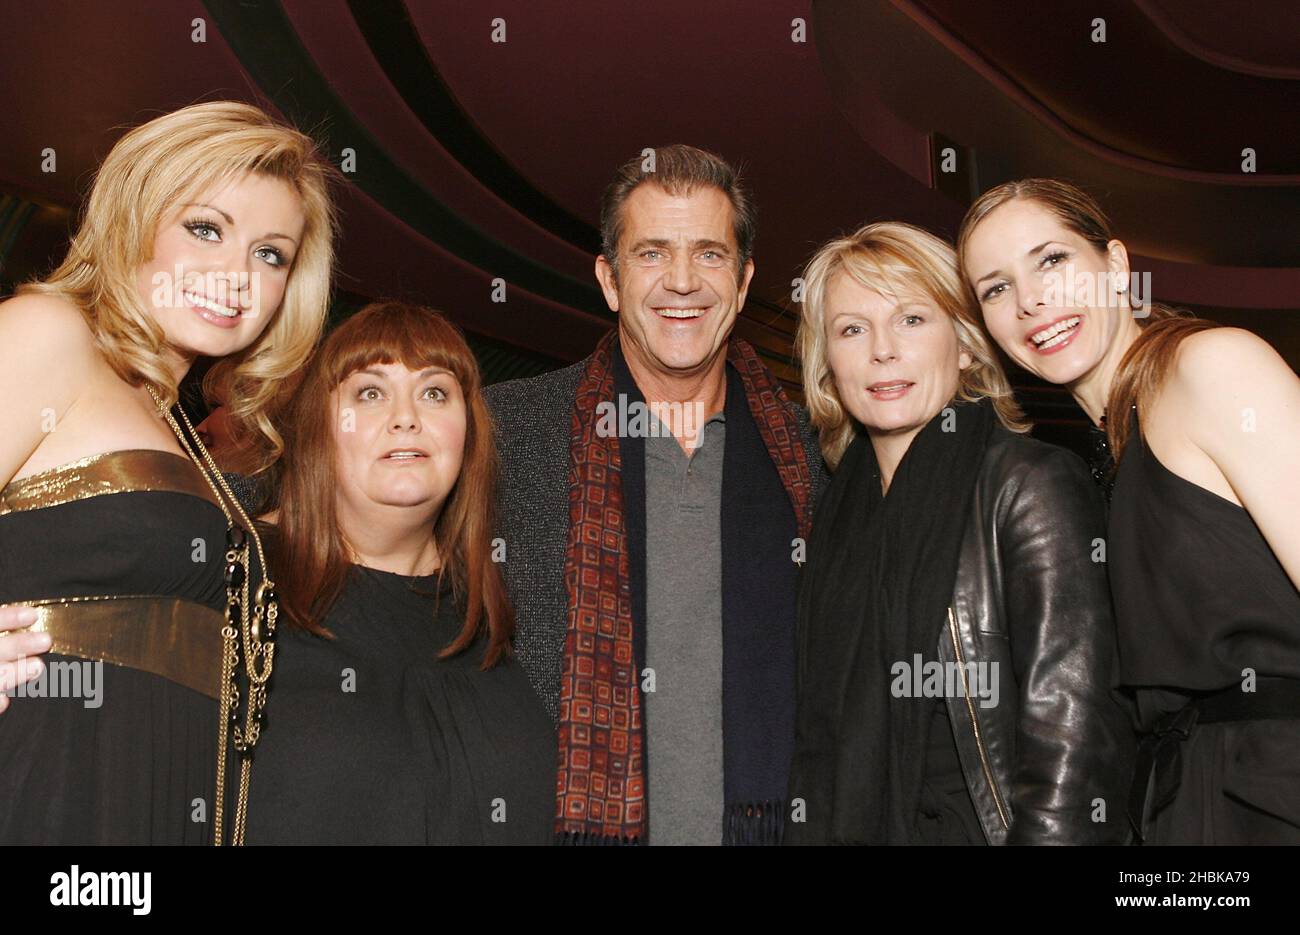 Katherine Jenkins, Dawn French, Mel Gibson, ,Jennifer Saunders, and Darcy Bussell at the Reception at the Viva La Diva, Carling Apollo, Hammersmith, London. Stock Photo